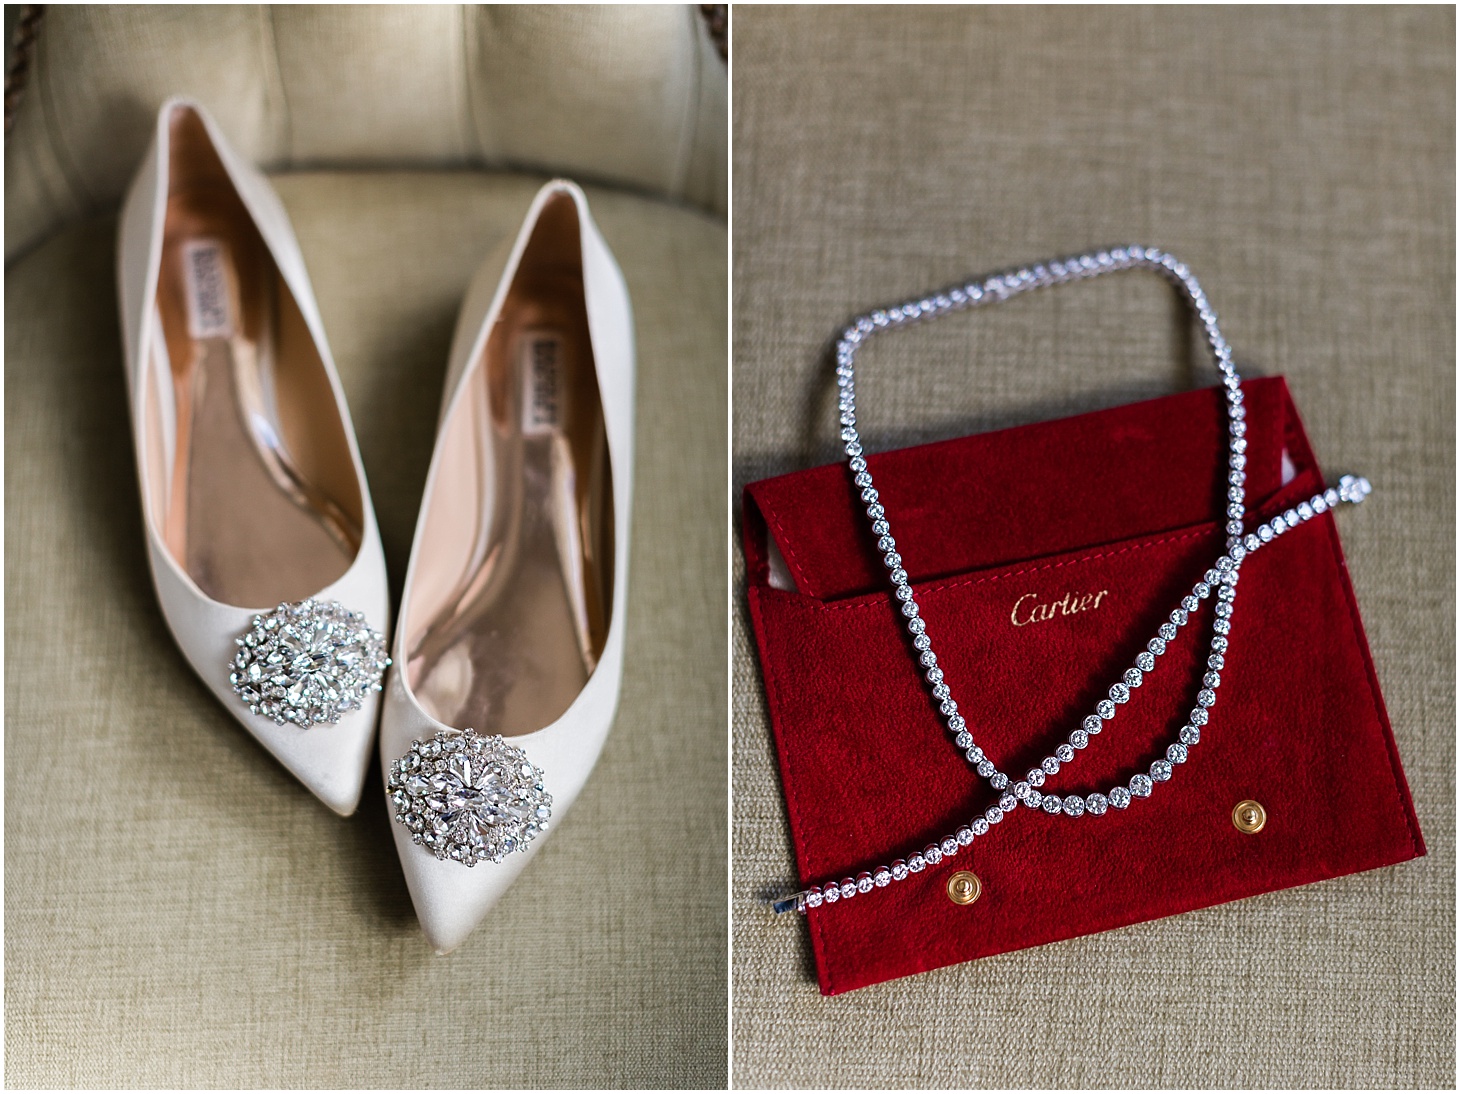 Badgley Mischka Crystal Embellished Wedding Shoes and Cartier Jewelry, Champagne-toned Multicultural Wedding at Hay-Adams Hotel, Sarah Bradshaw Photography